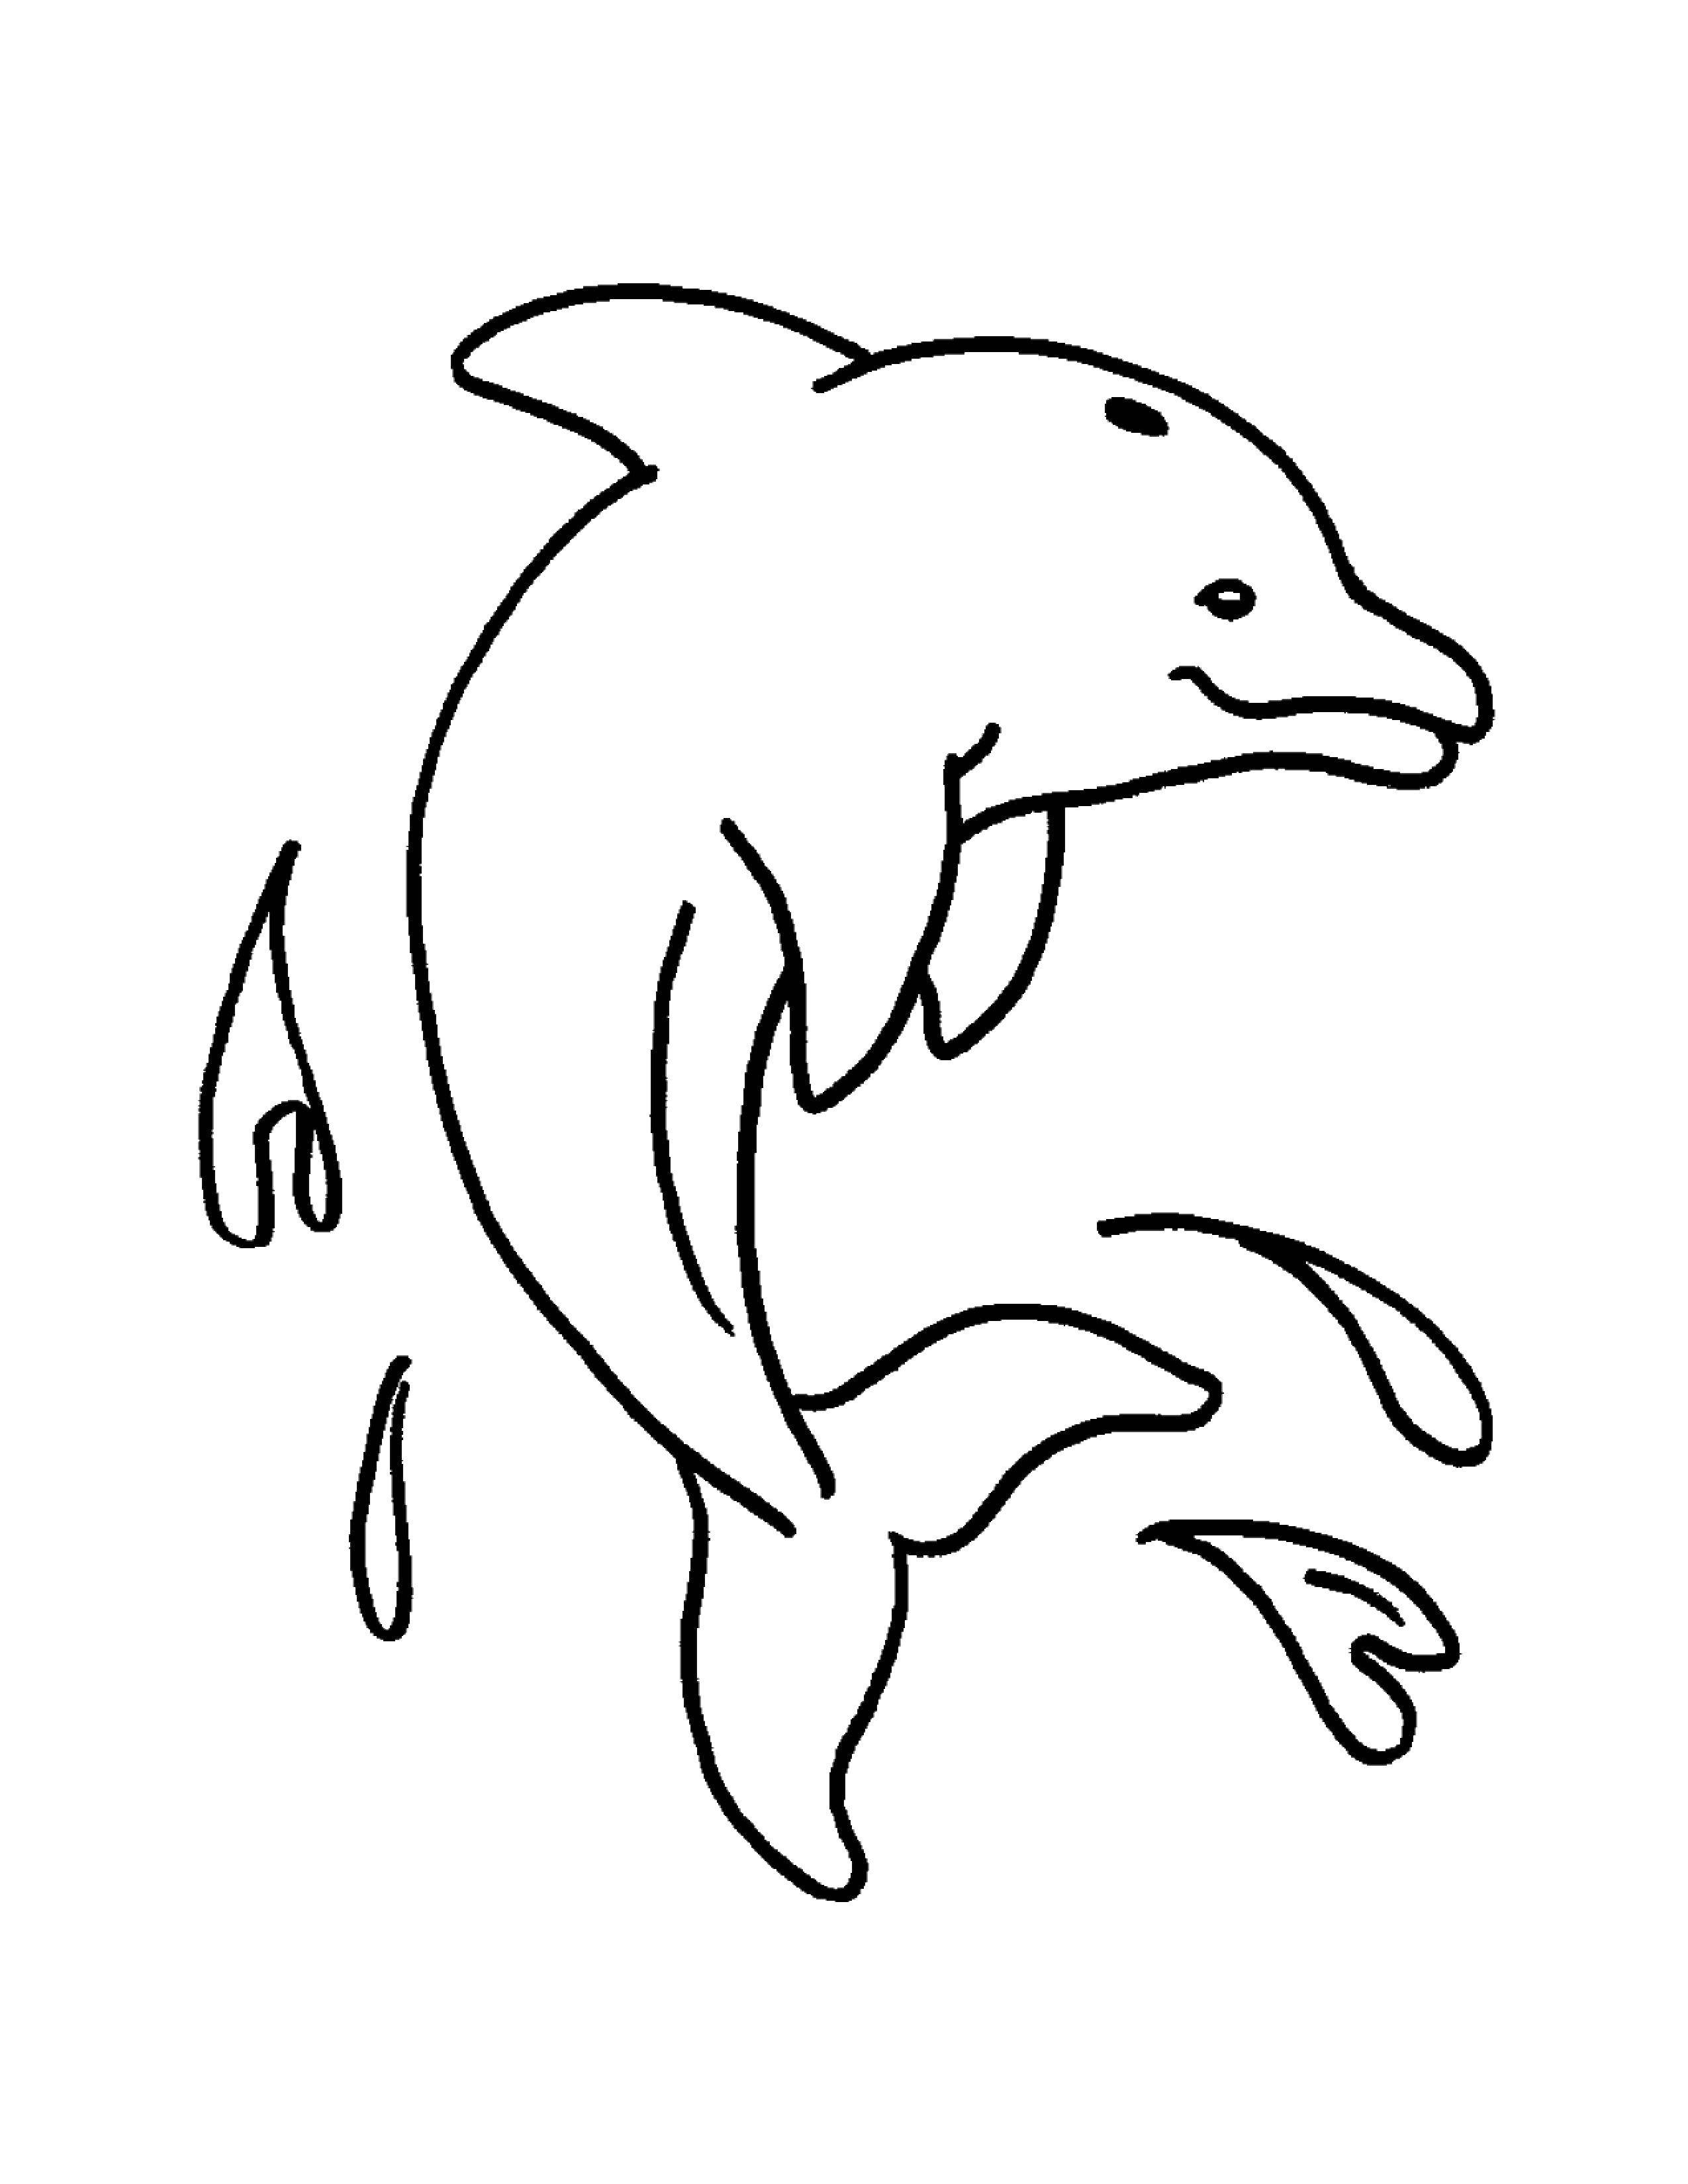 Coloring Dolphin. Category Marine animals. Tags:  Dolphin, marine animals.